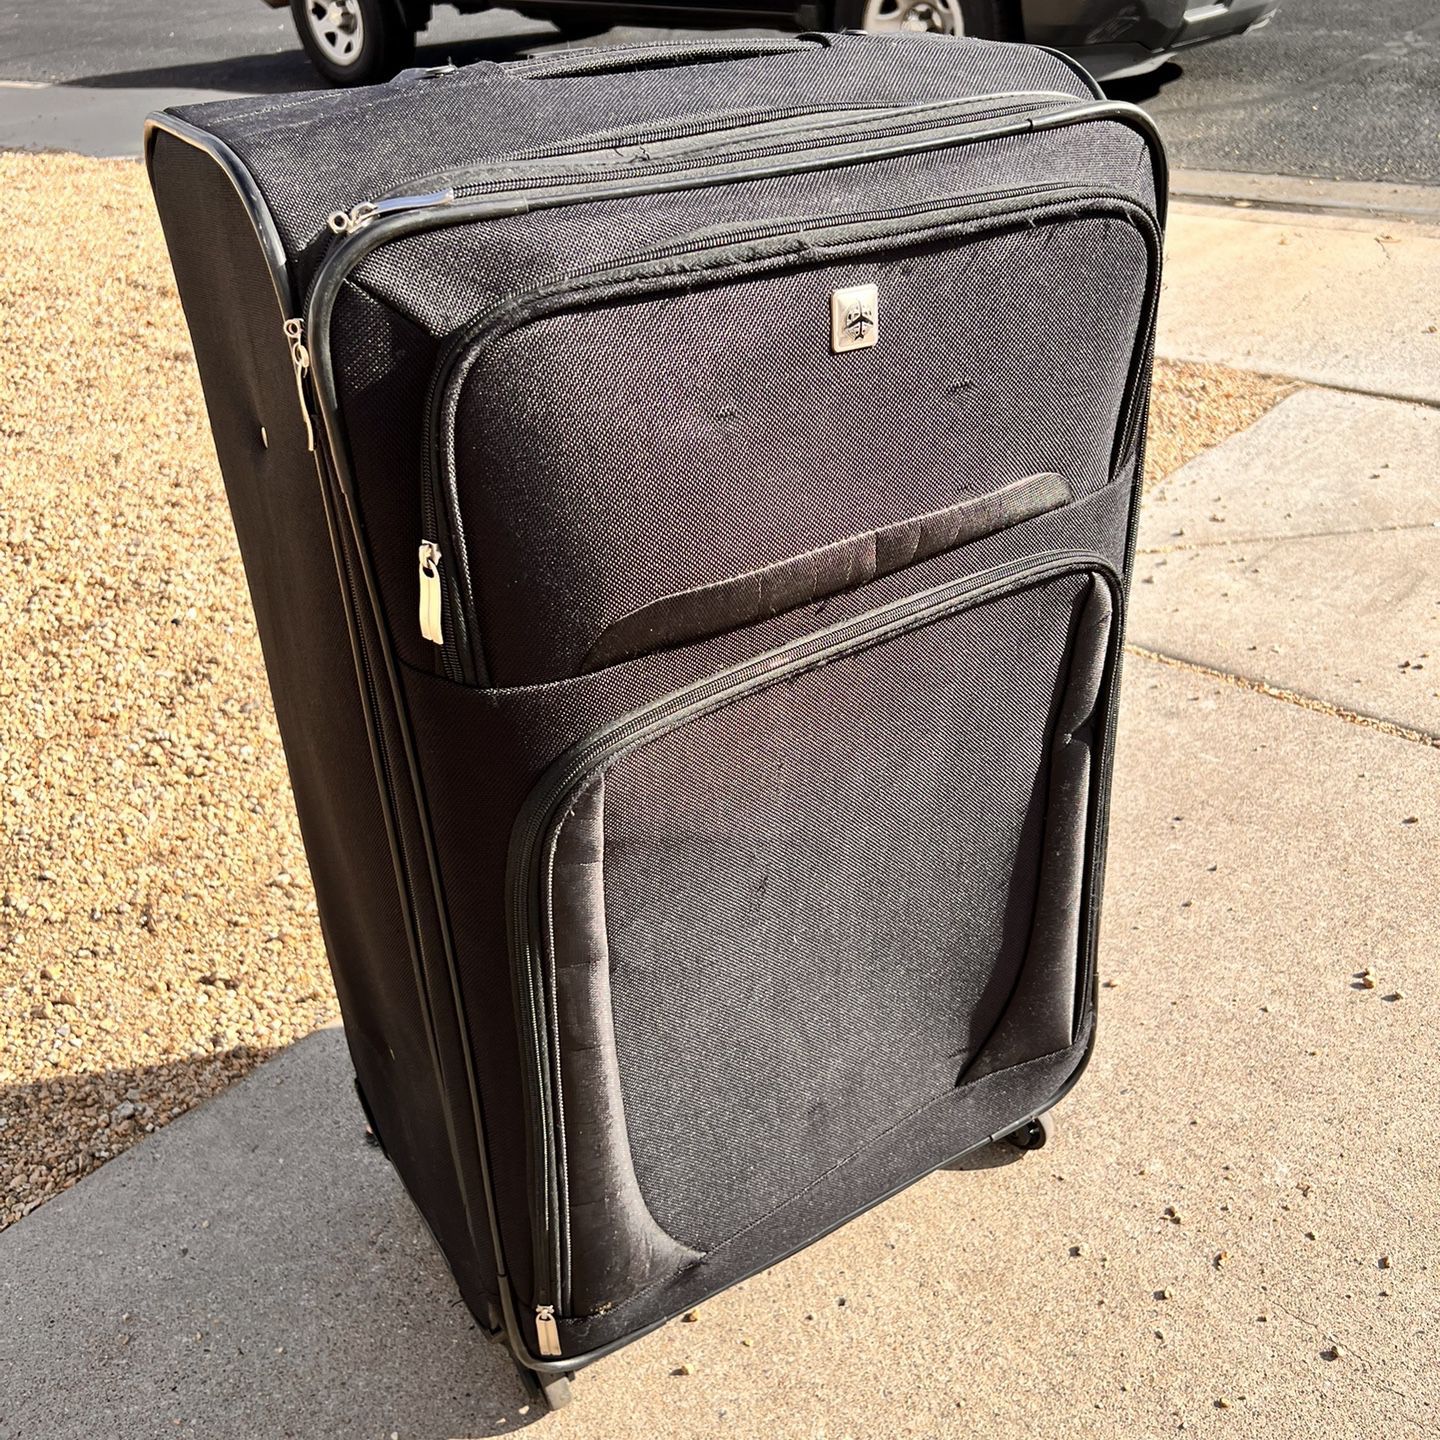 Louis Vuitton Zephyr 55” Rolling Suitcase for Sale in Delray Beach, FL -  OfferUp